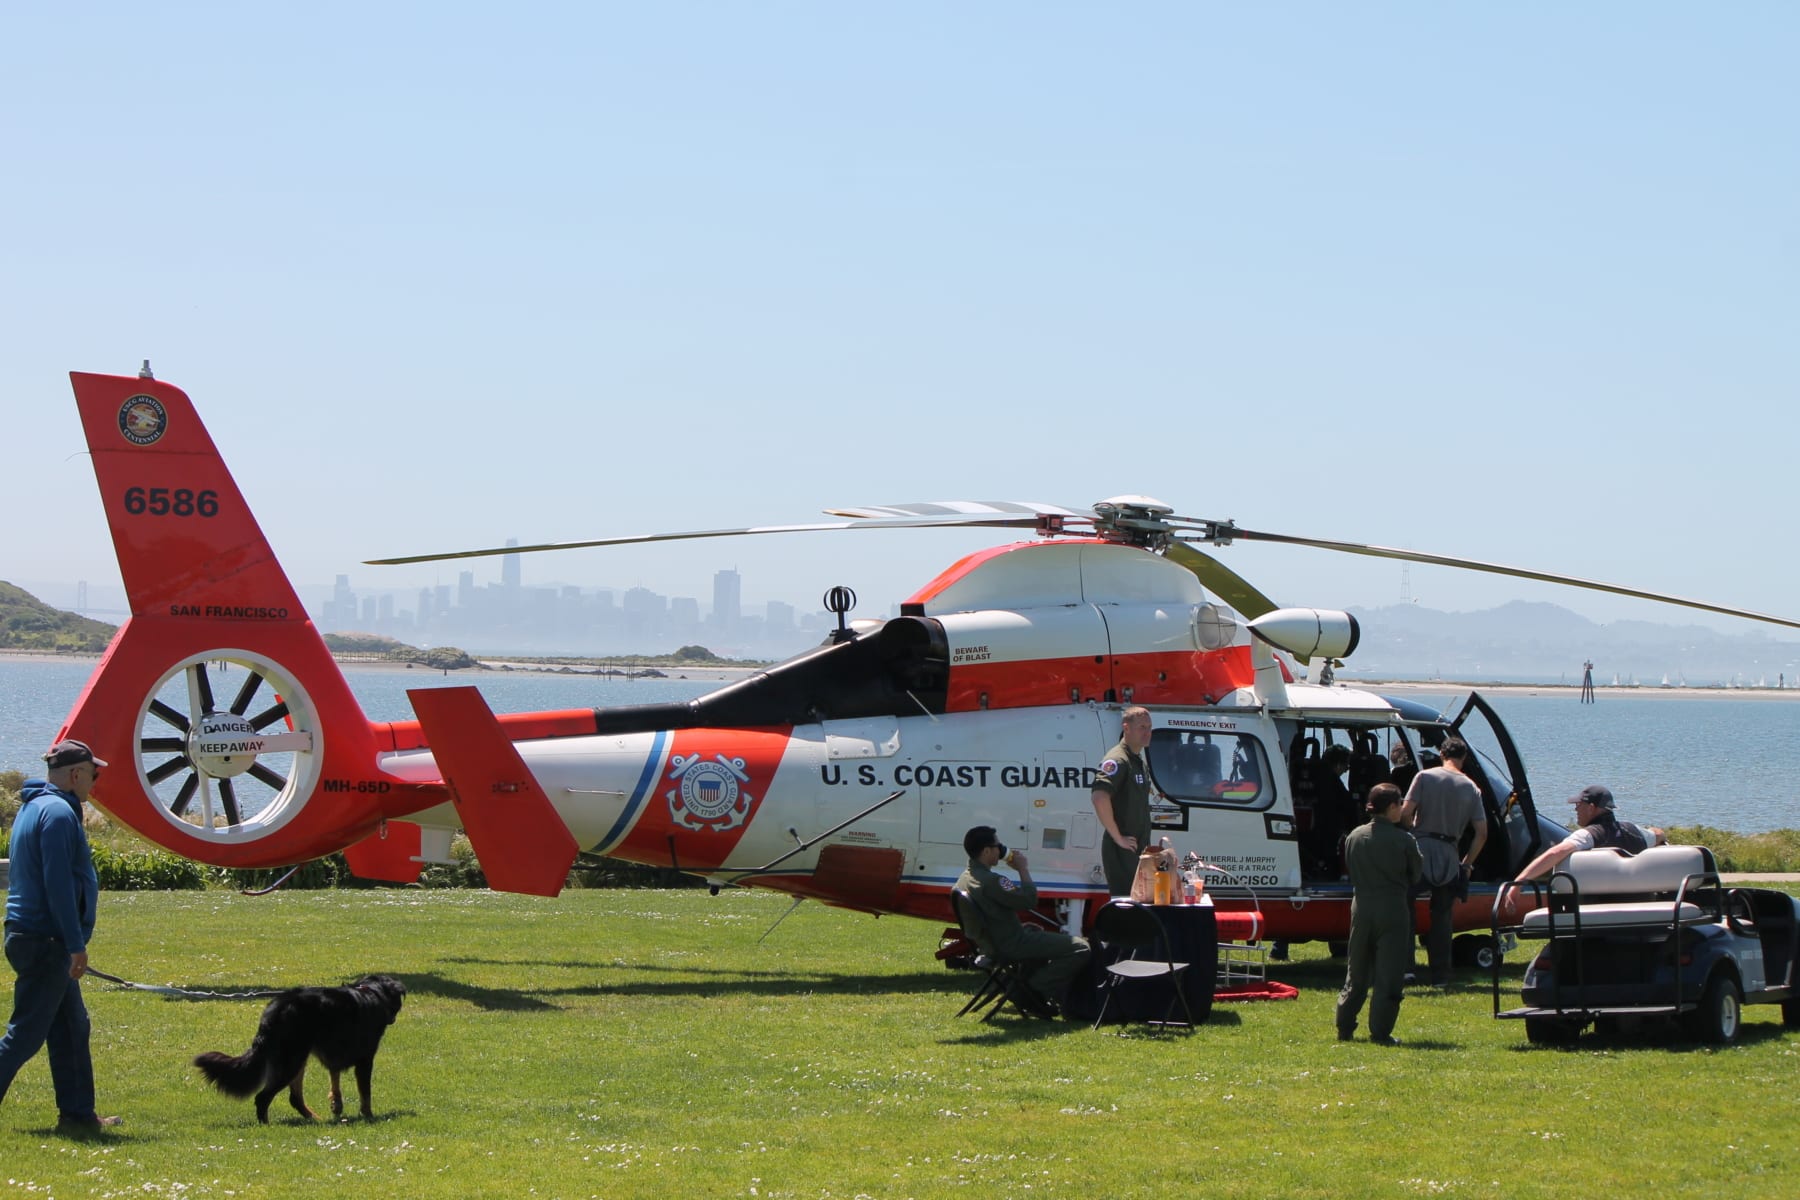 U.S. Coast Guard Search And Rescue helicopter